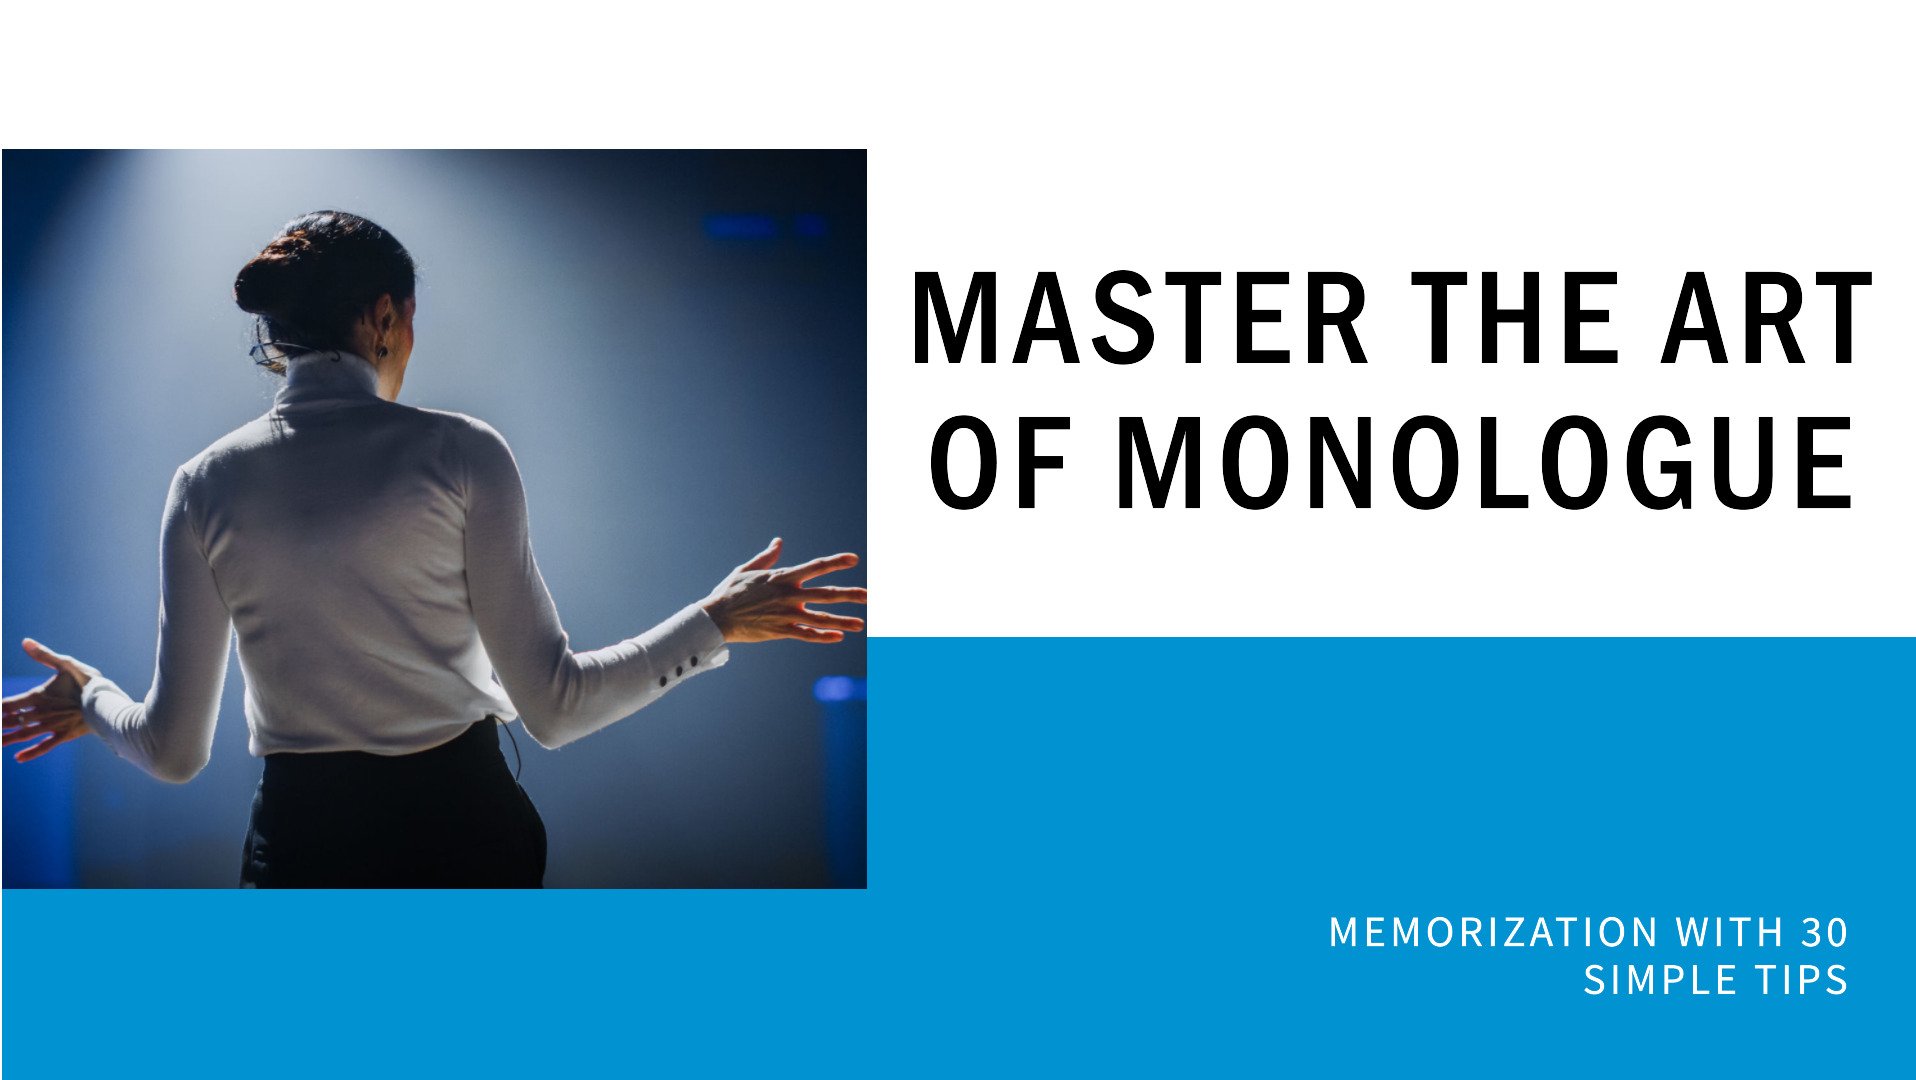 Master the Art of Monologue: Memorization With 30 Simple Tips